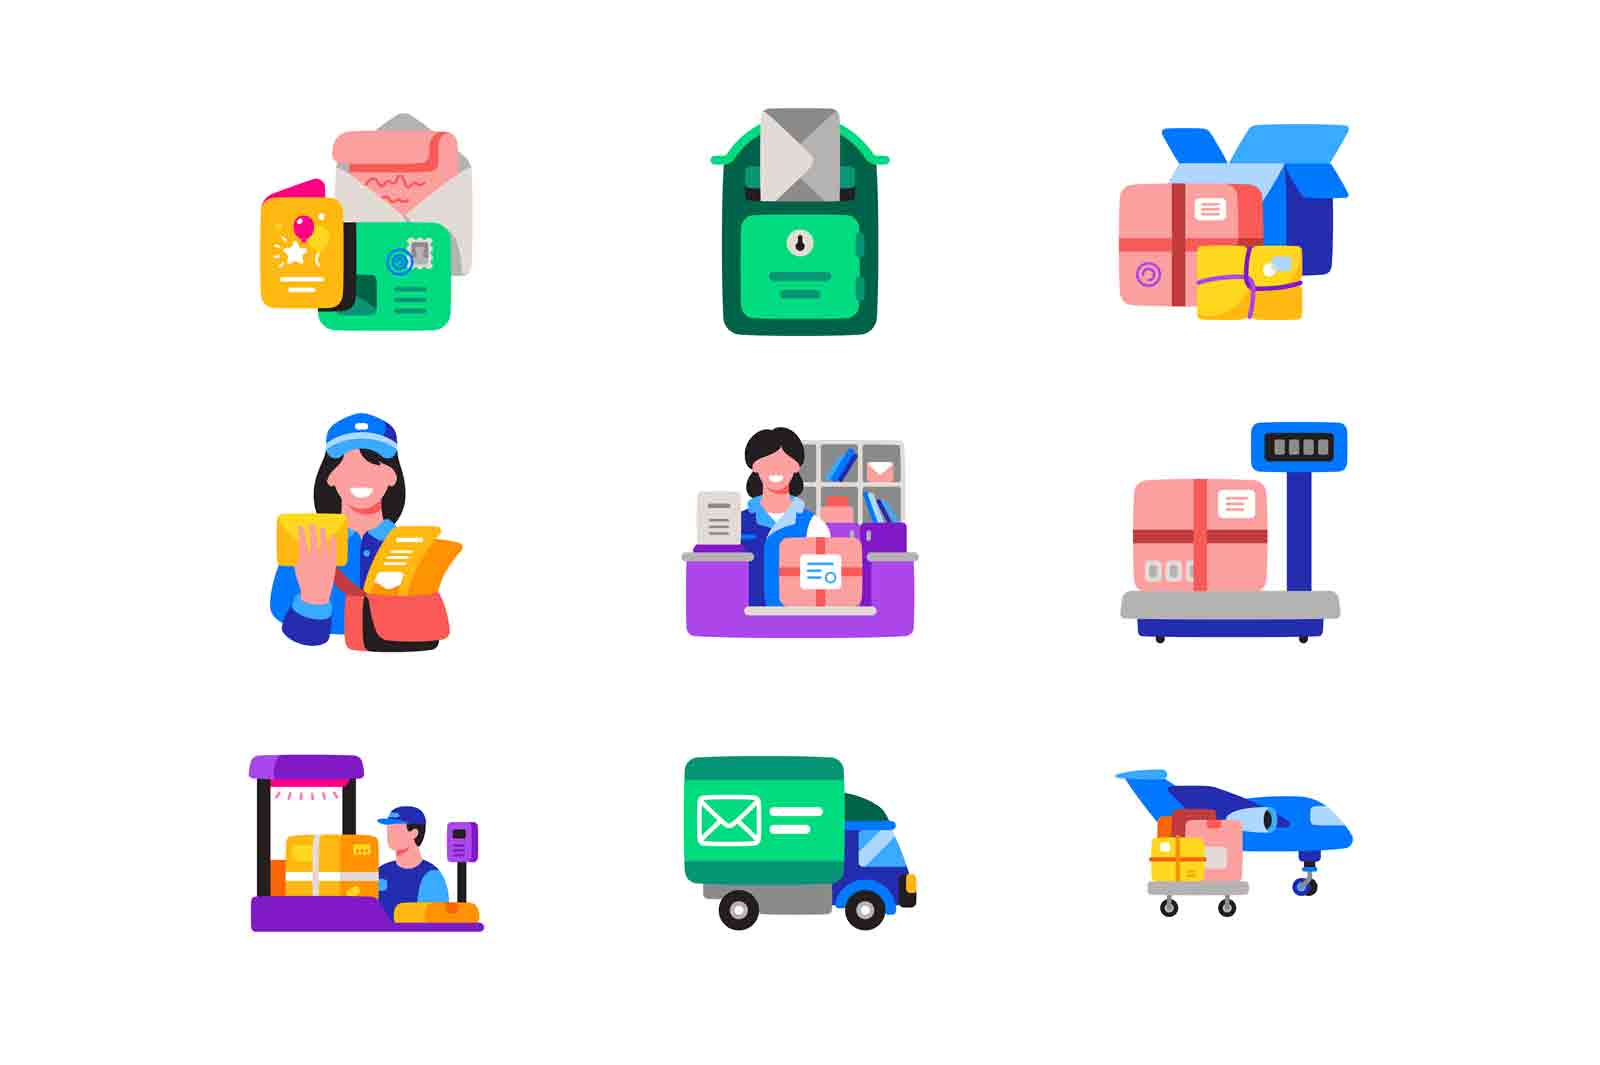 Mail service icon set. All types of mail delivery services that are available for people.